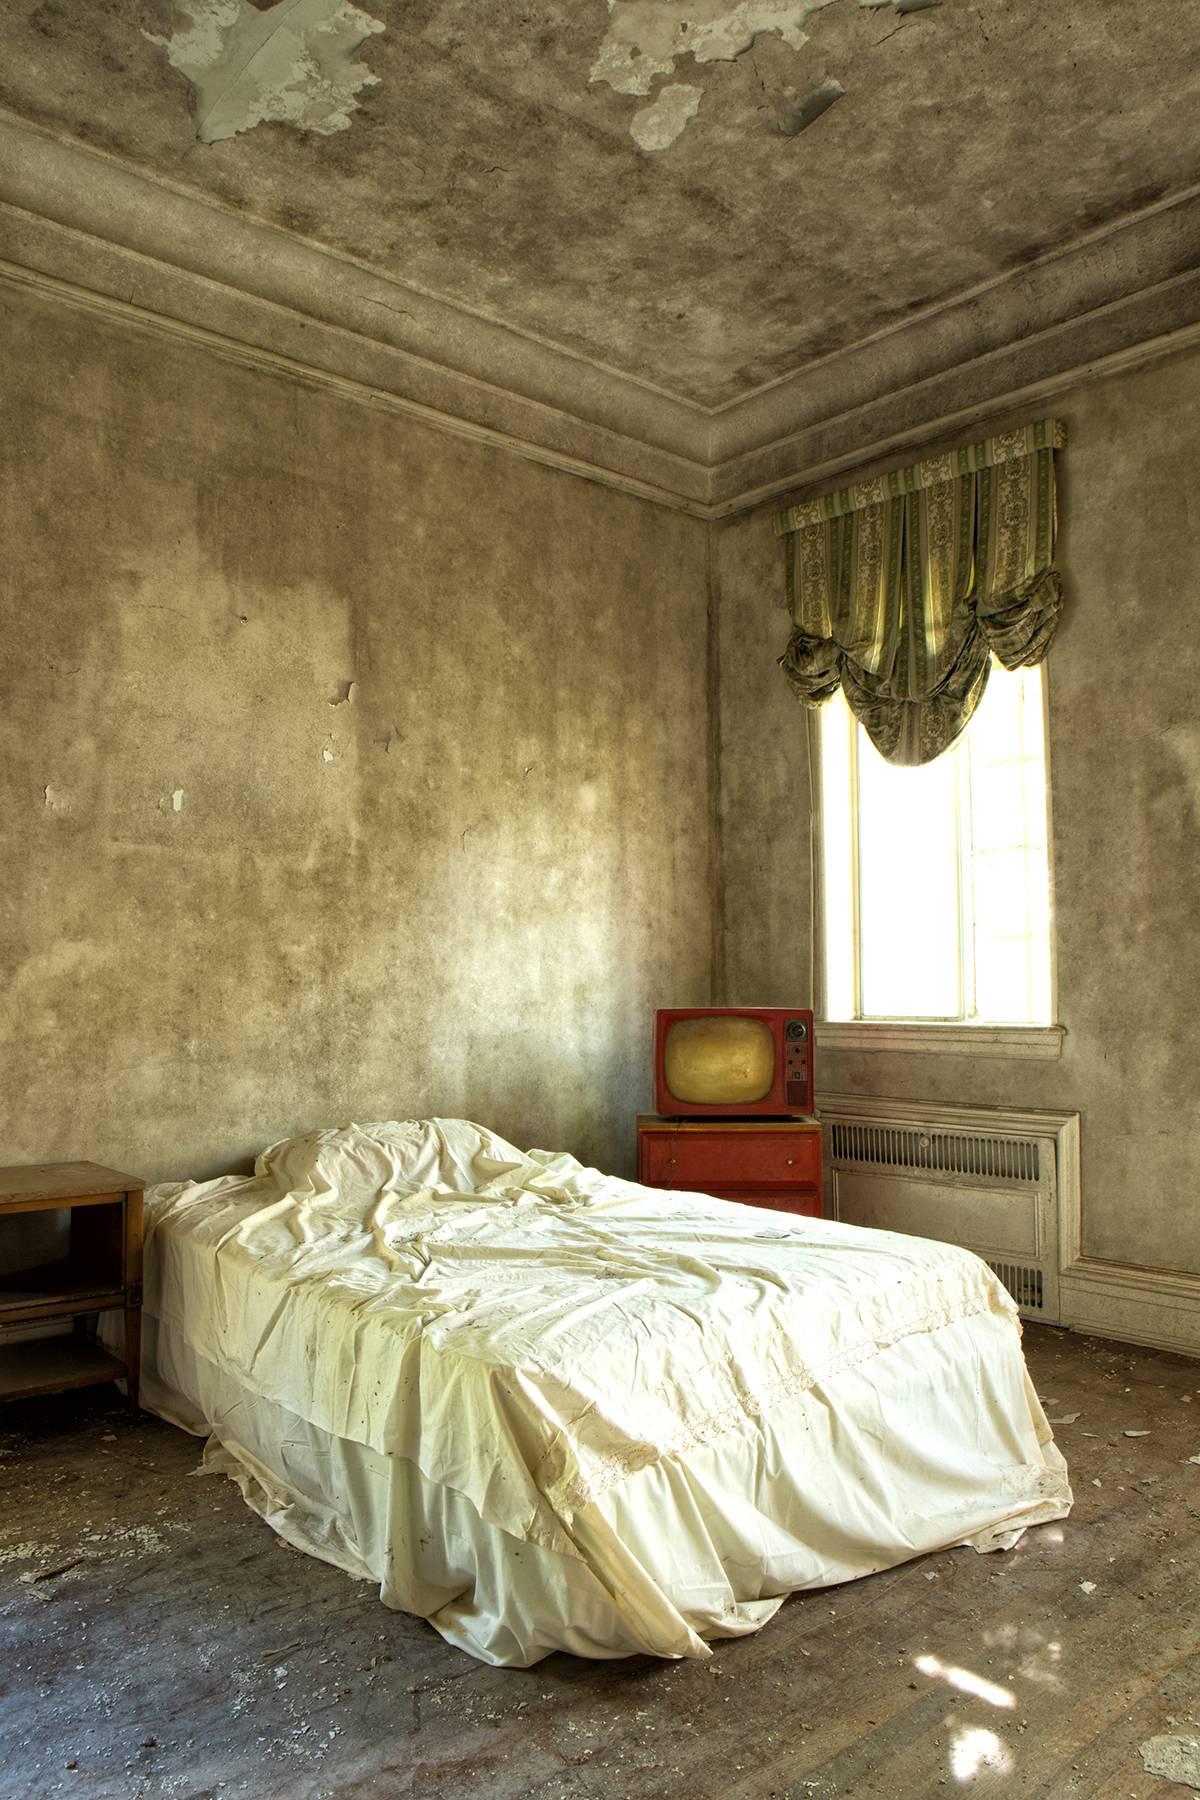 "Momentary", contemporary, abandoned, home, bedroom, red, color photograph - Photograph by Rebecca Skinner